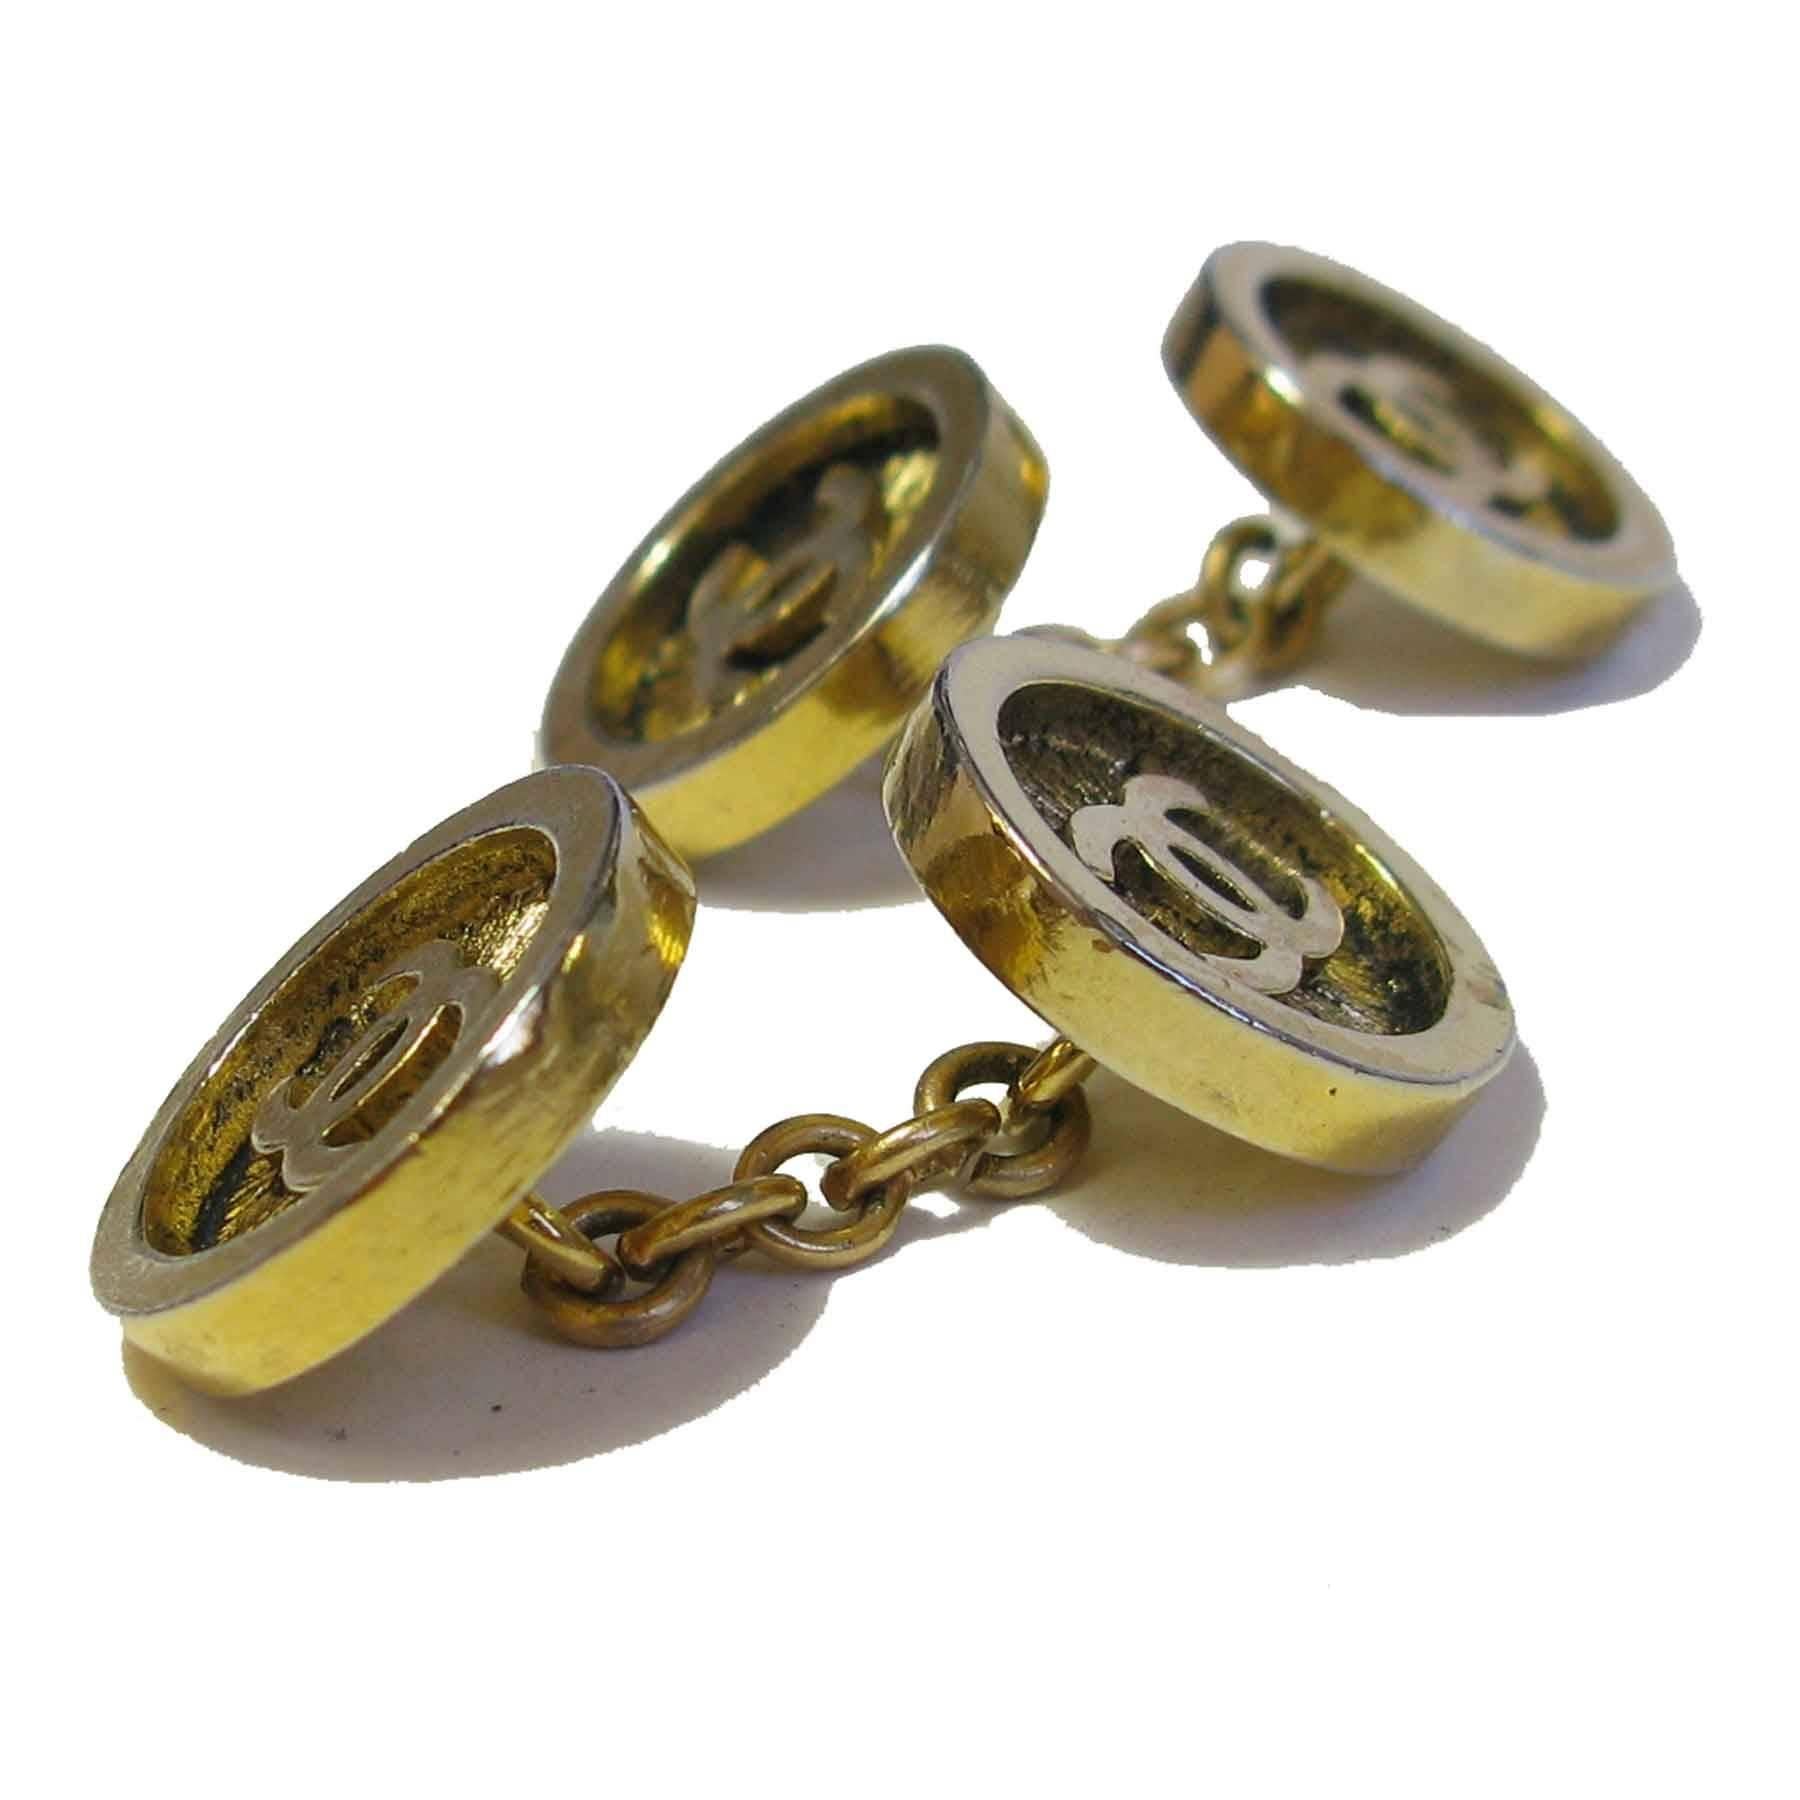 Chanel cufflinks in gilt metal with a central CC.

Dimensions: diameter of the central part: 1,6 cm

Delivered in a Valois Vintage Paris dustbag